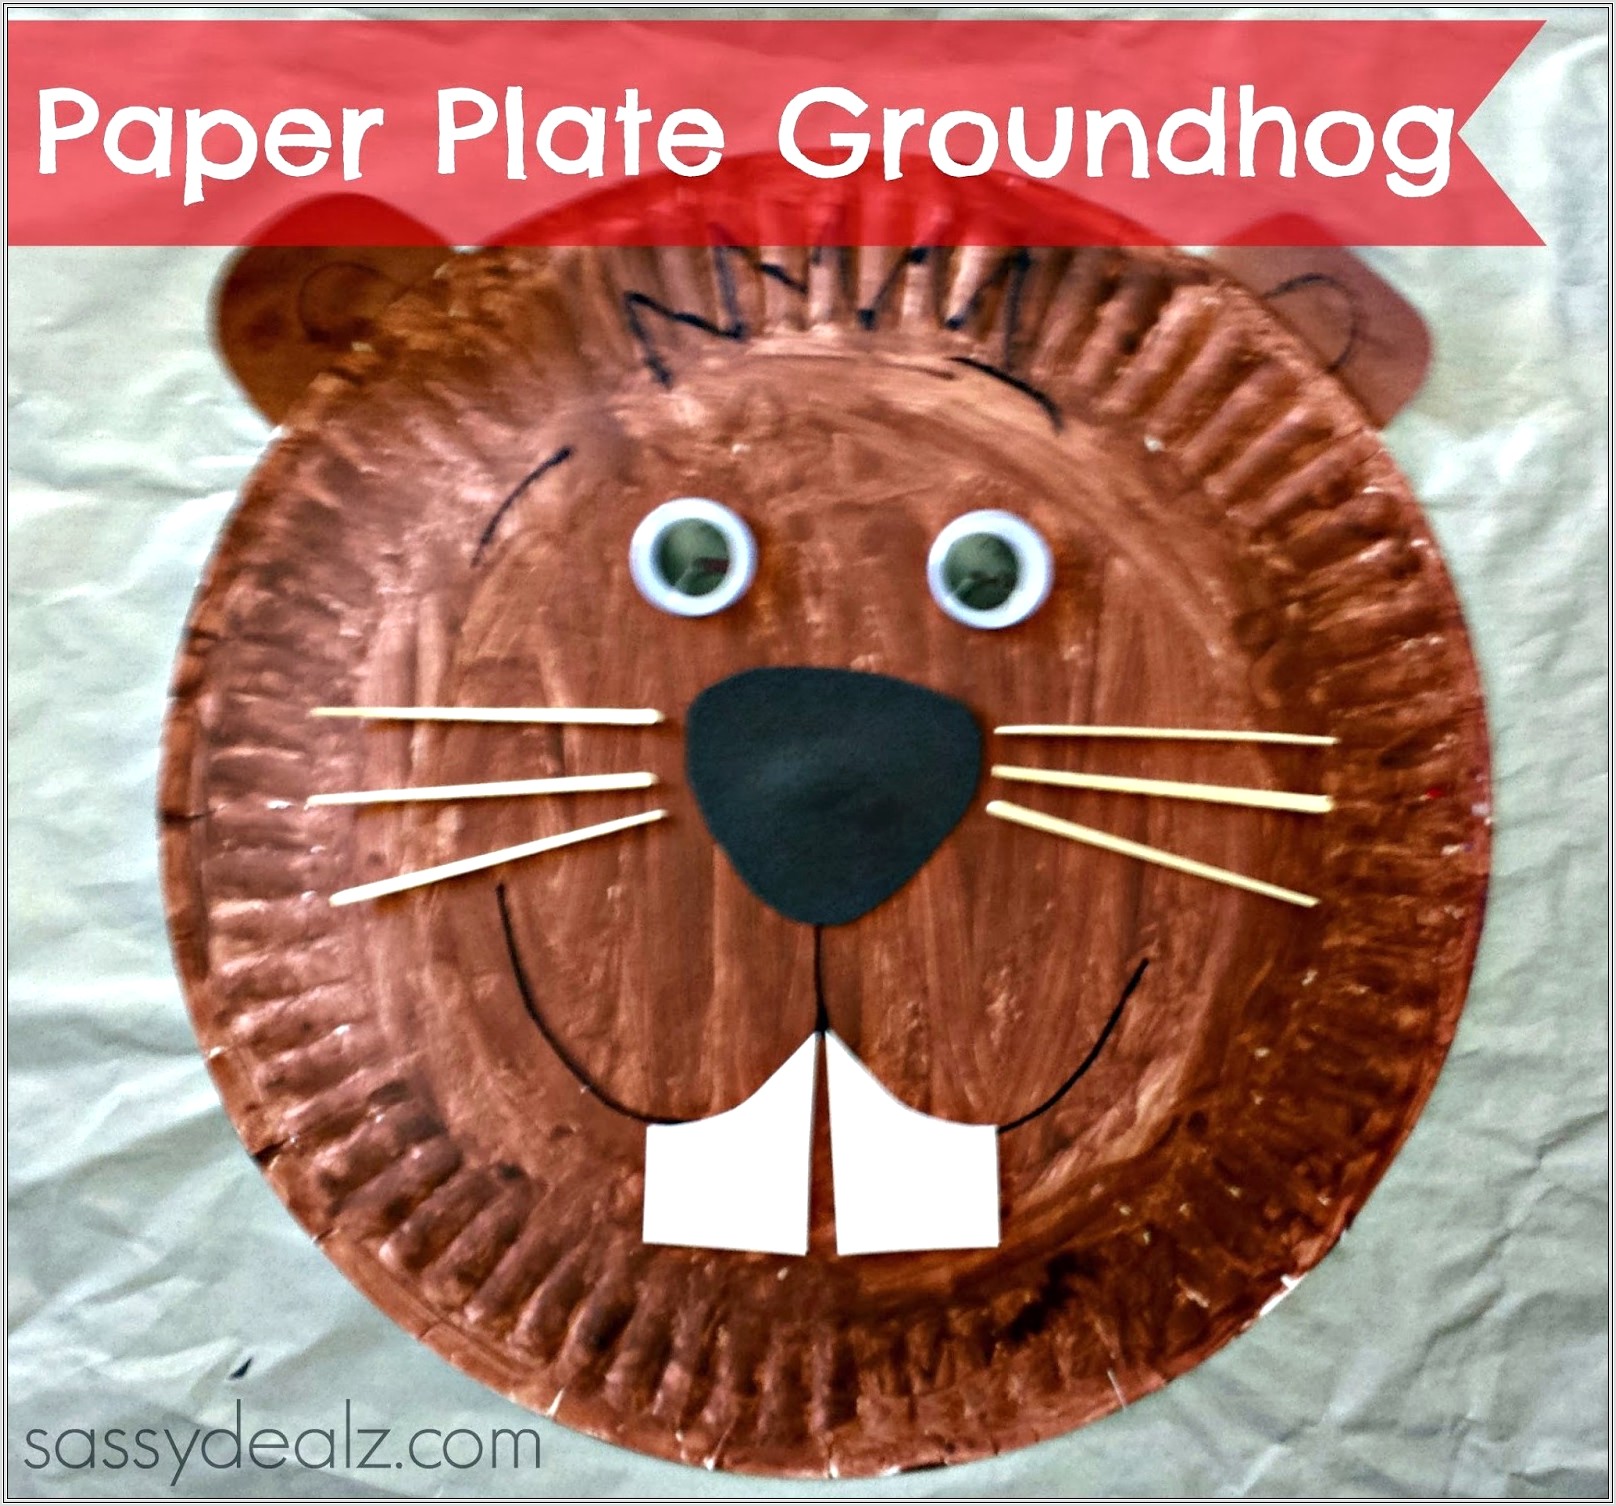 Groundhog Day Craft With Cup